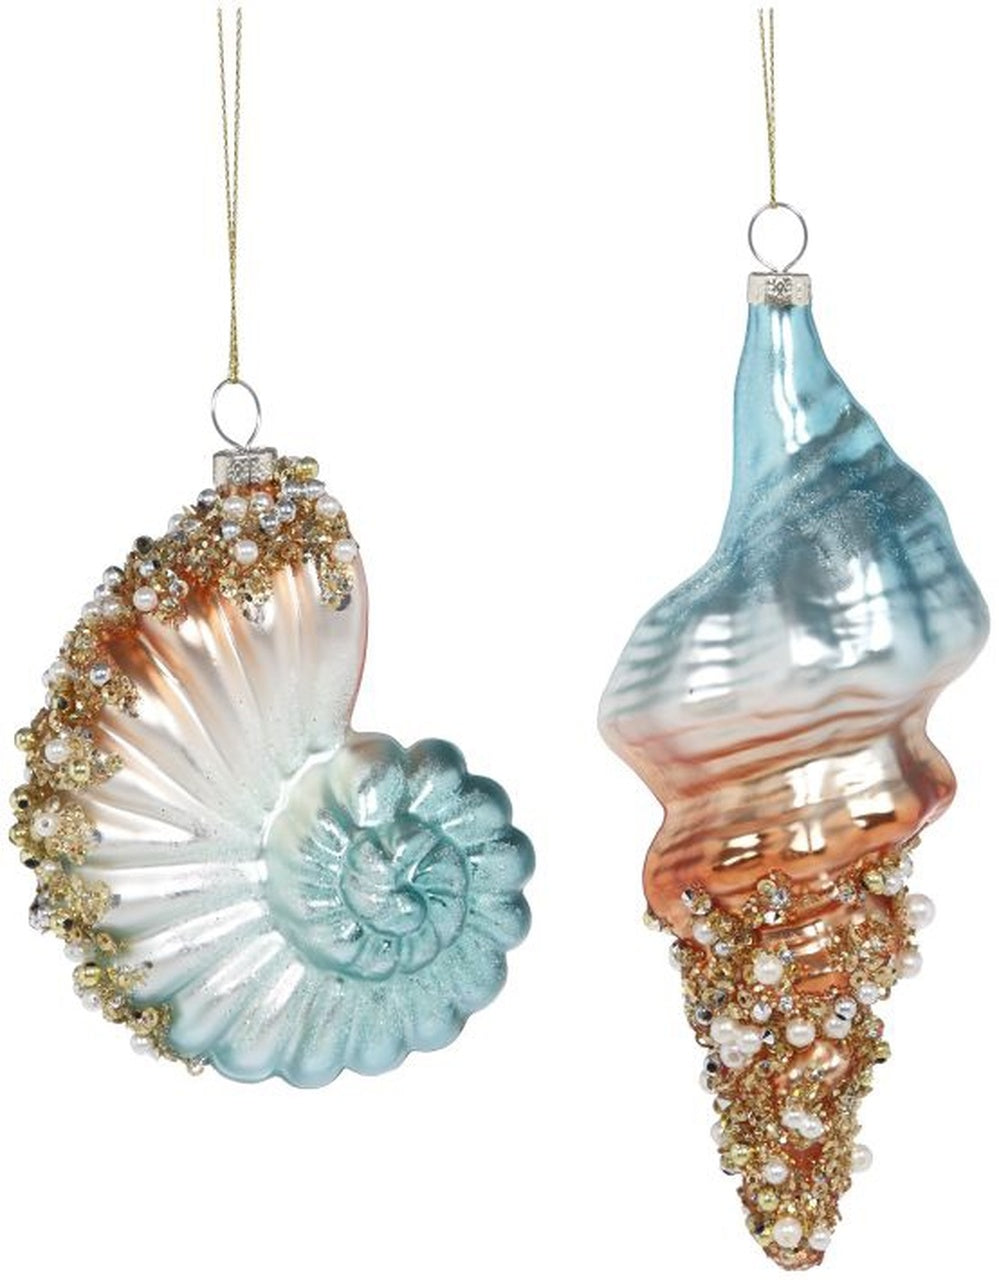 Jeweled Shell Ornament by Mark Roberts